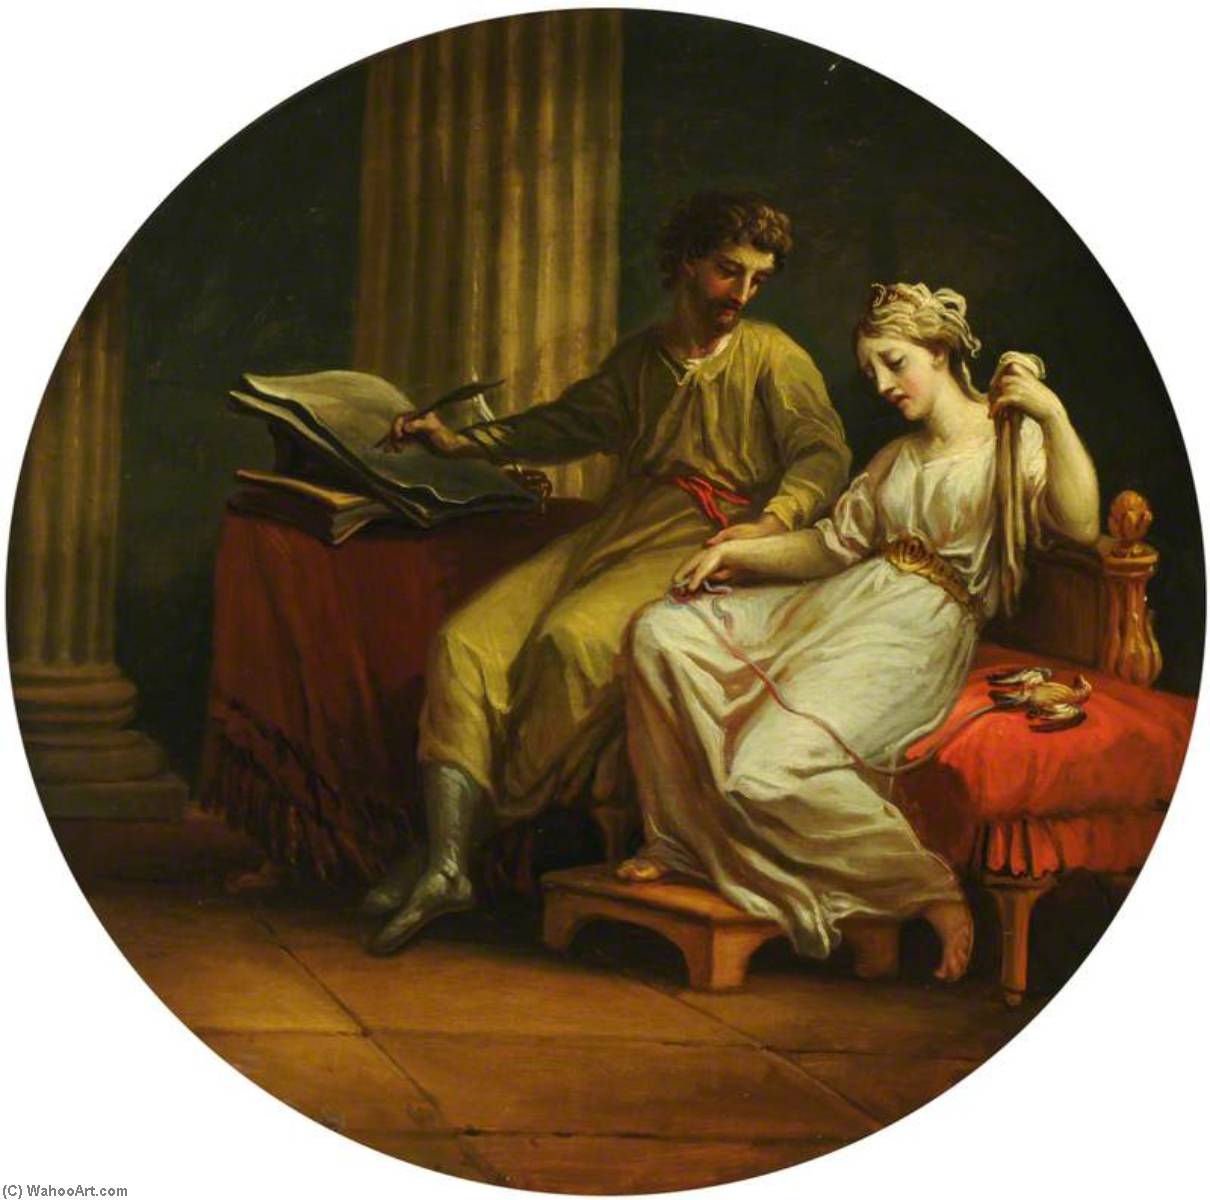 WikiOO.org - Güzel Sanatlar Ansiklopedisi - Resim, Resimler Antonio Zucchi - Catullus Comforting Lesbia over the Death of Her Pet Sparrow and Writing an Ode